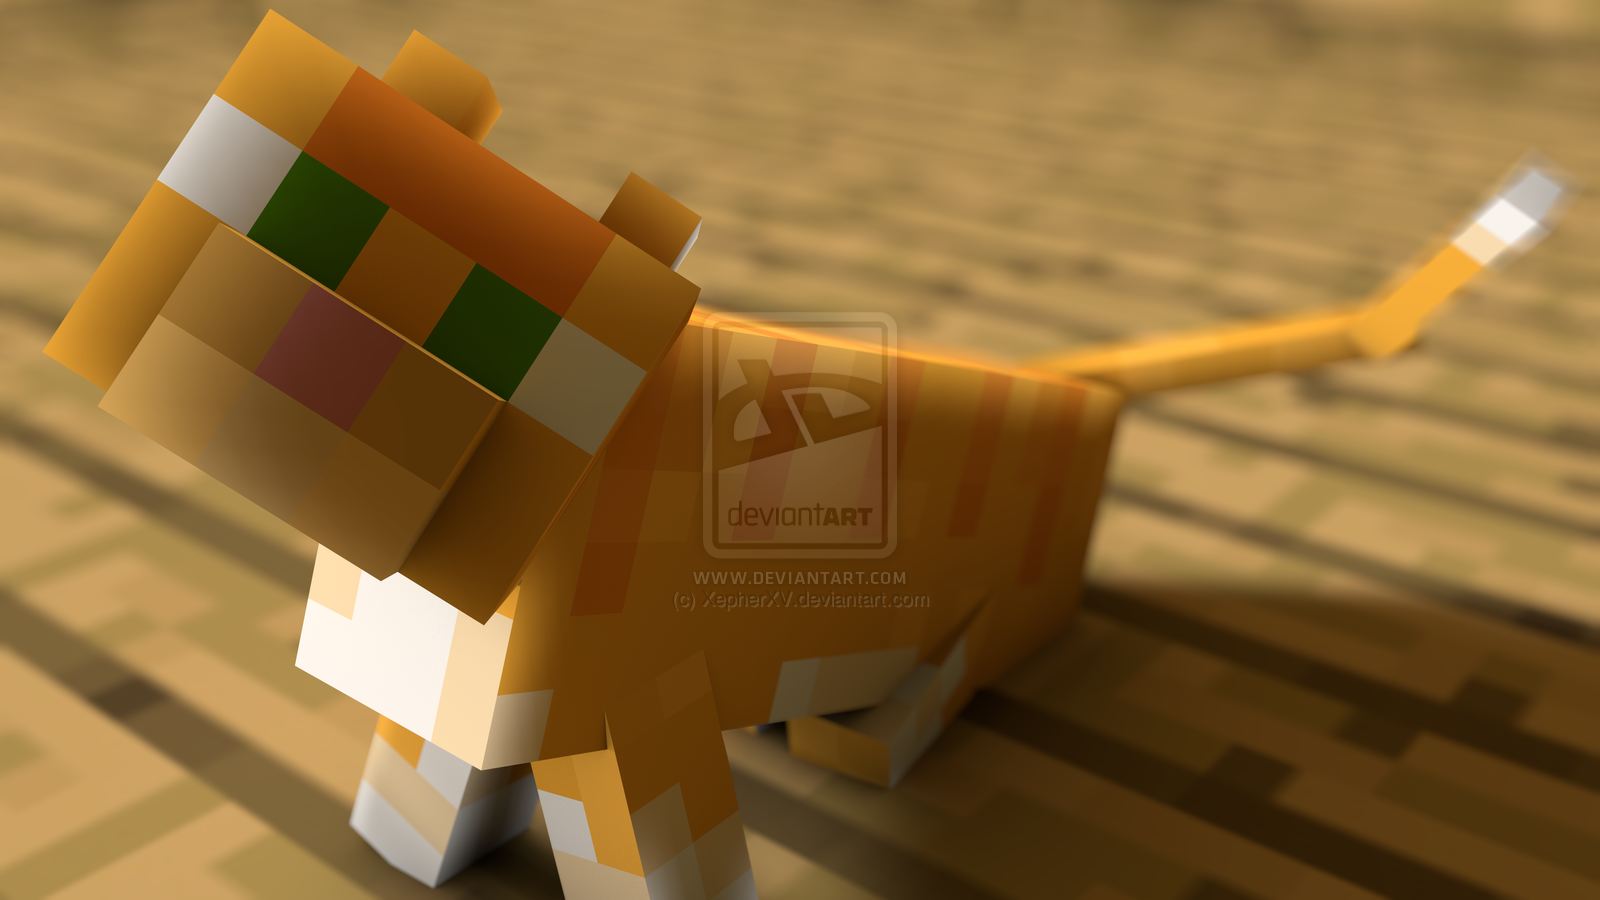 minecraft cats wallpapers Wallpapers